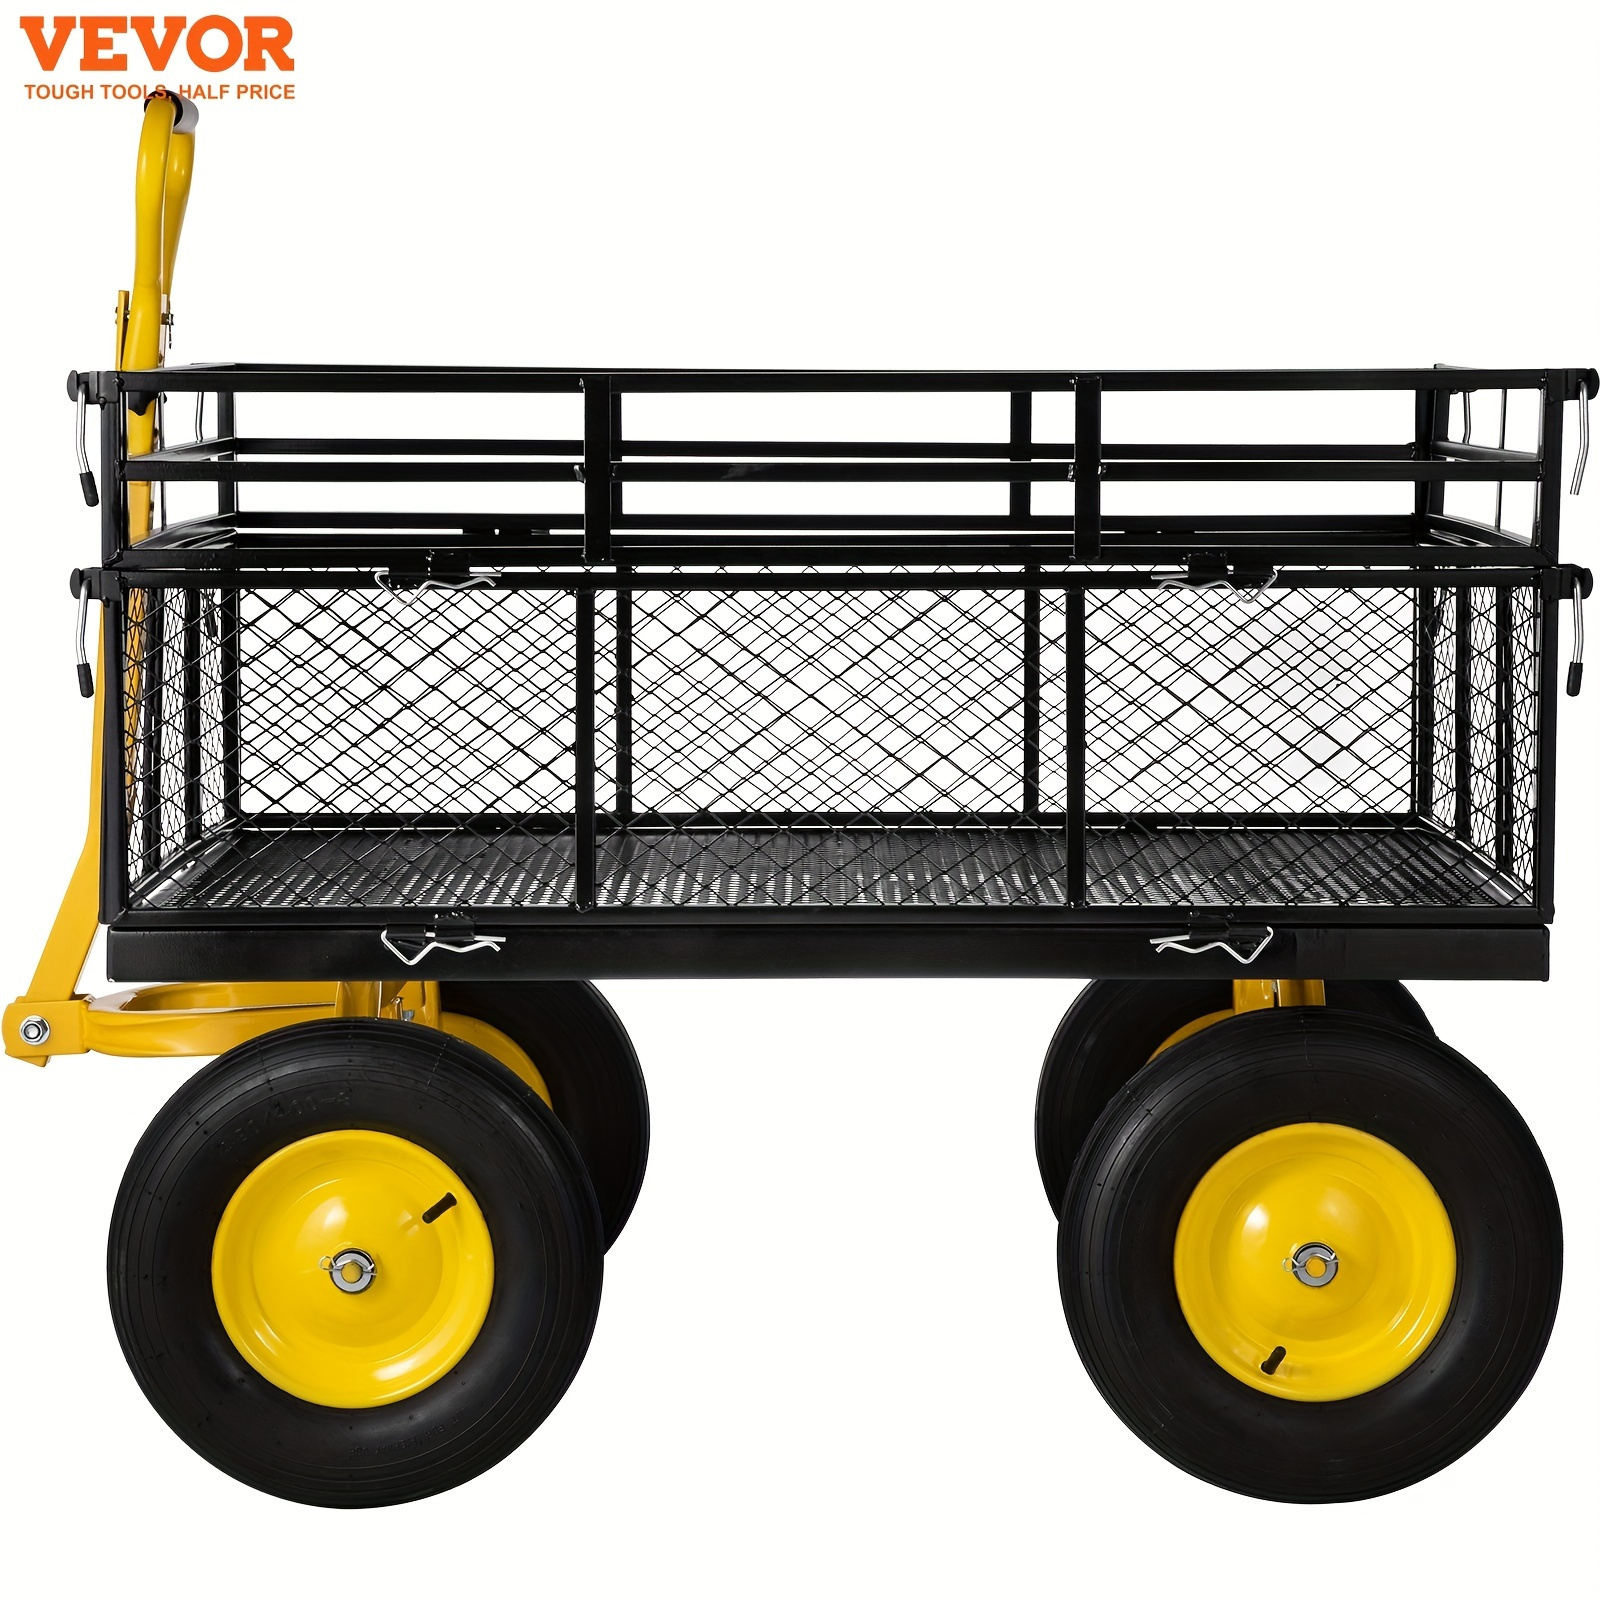 

Steel Garden Cart, Heavy Duty 1400 Lbs Capacity, With Removable Mesh Sides To Convert Into Flatbed, Utility Metal Wagon With 2-in-1 Handle And 15 In Tires, Perfect For Garden, Farm, Yard